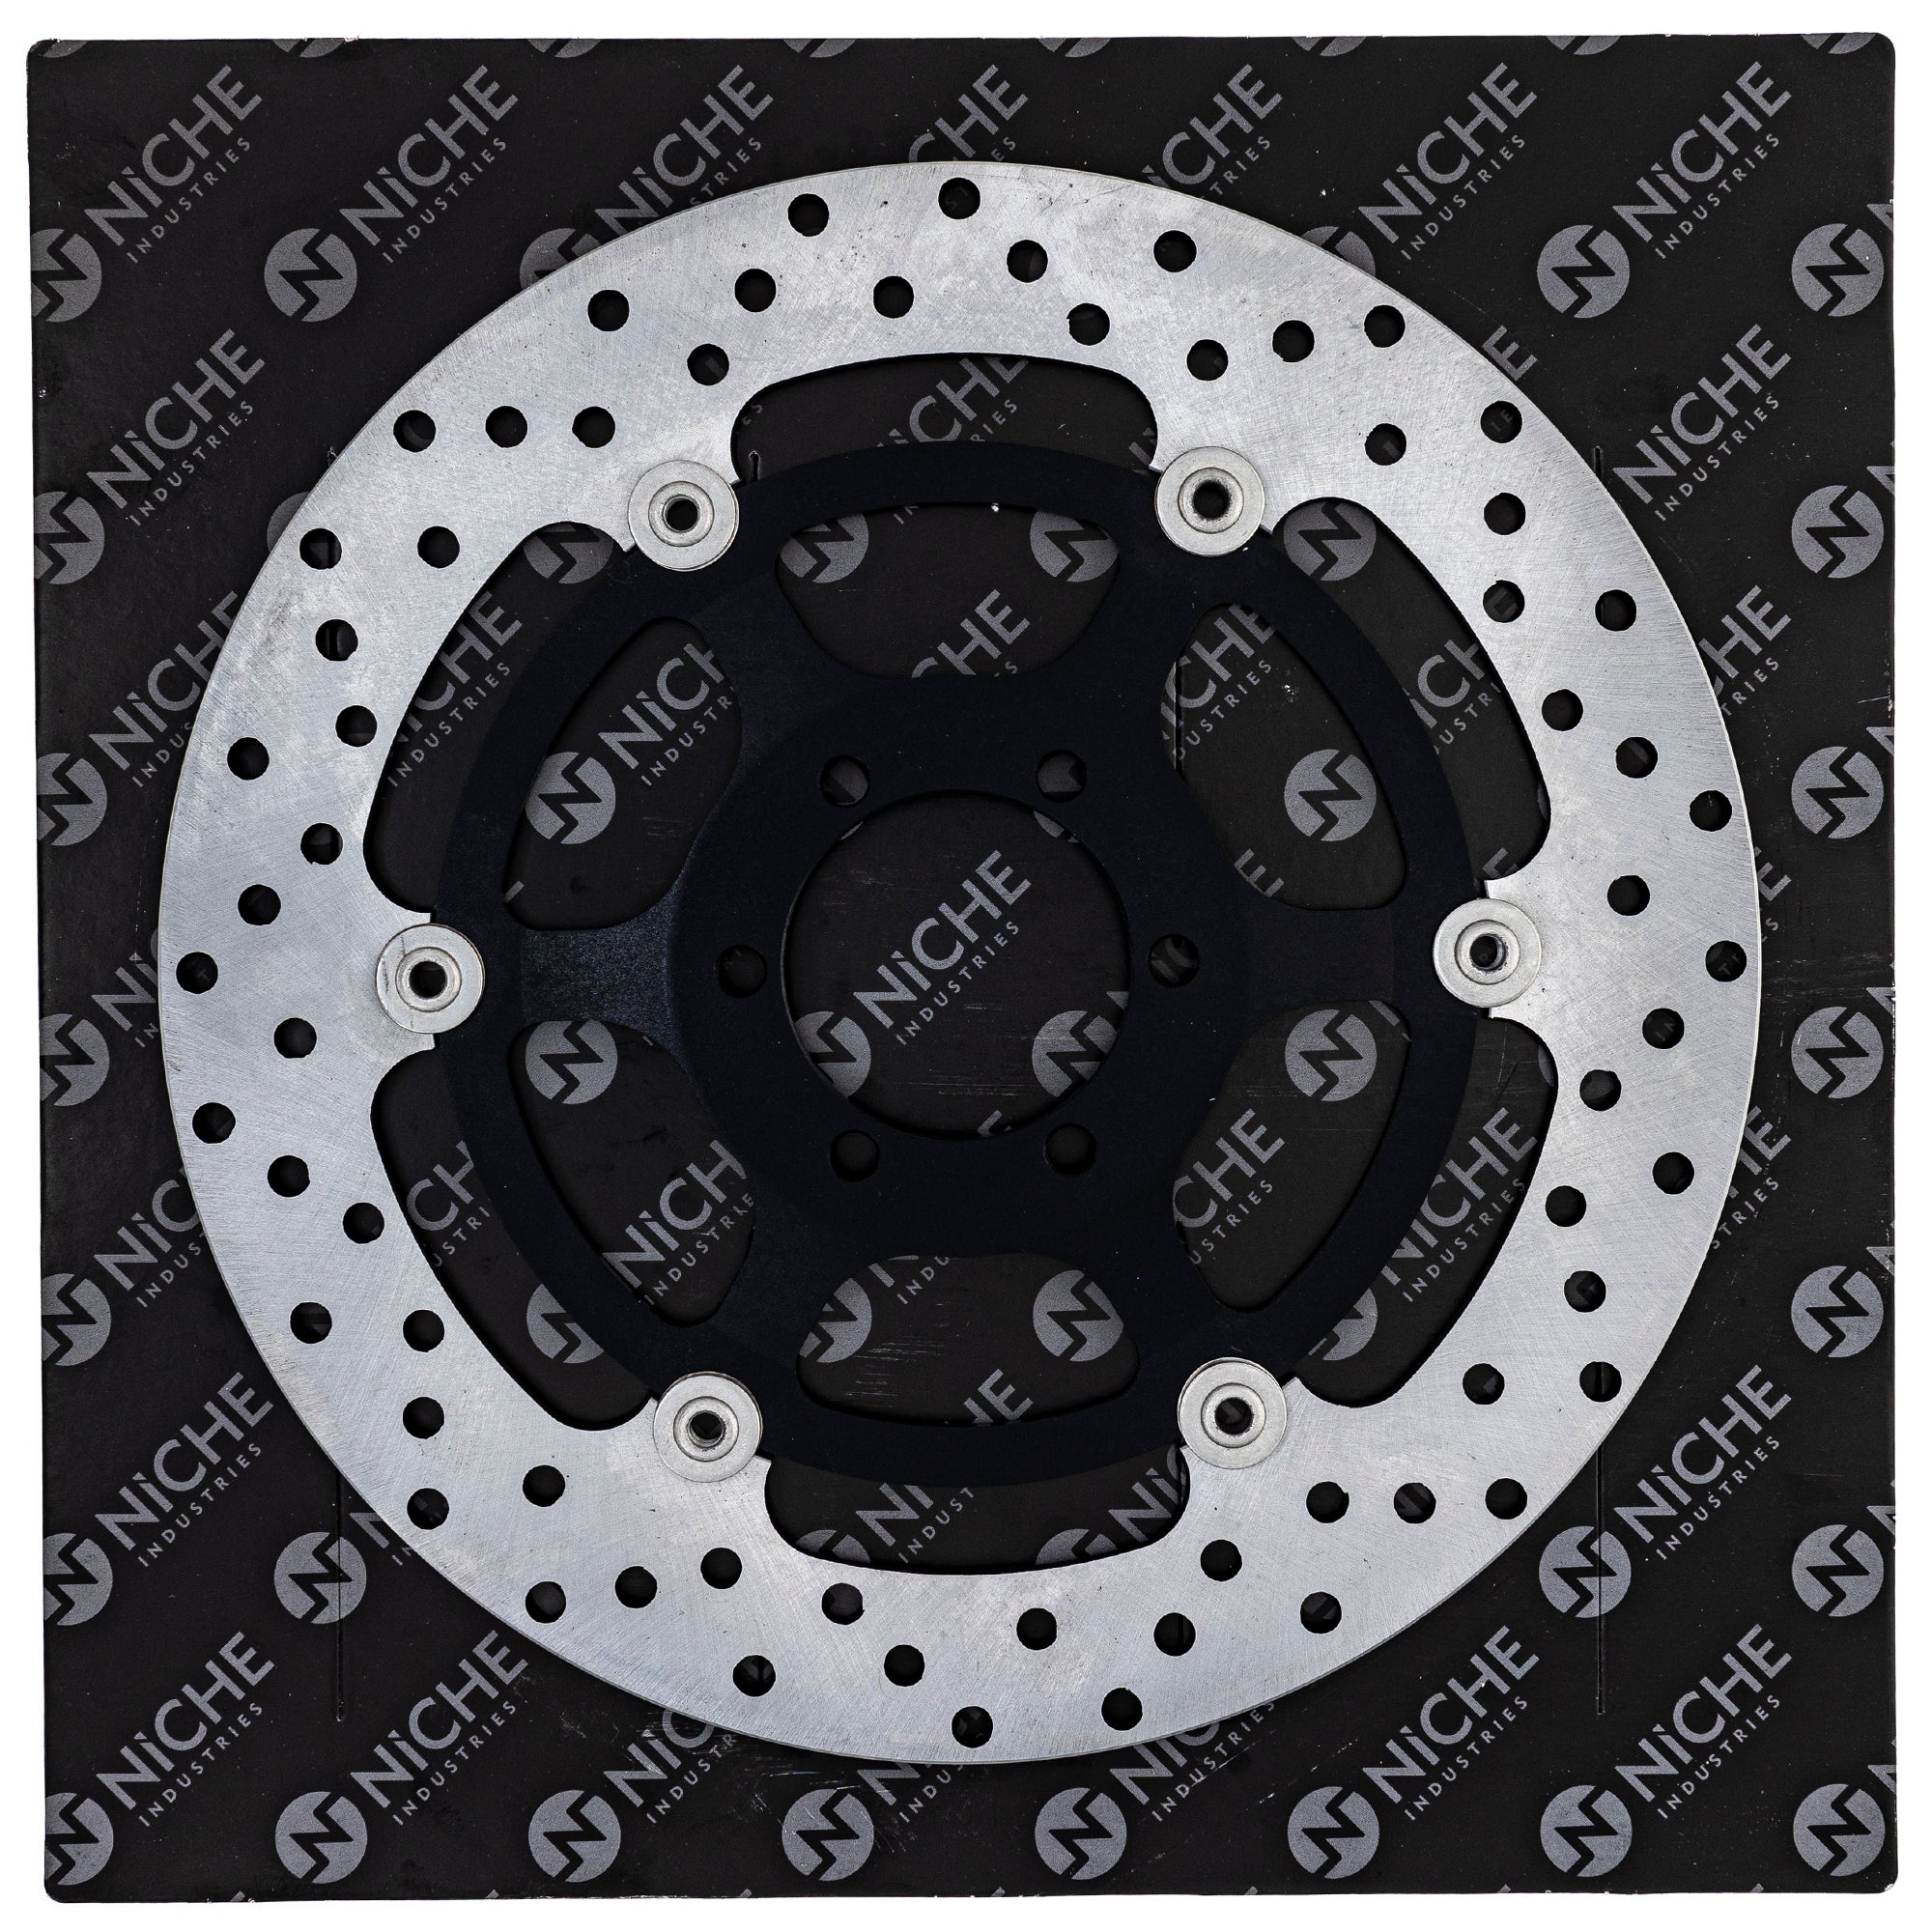 NICHE 519-CRT2373R Front Brake Rotor for zOTHER YZF600R TDM850